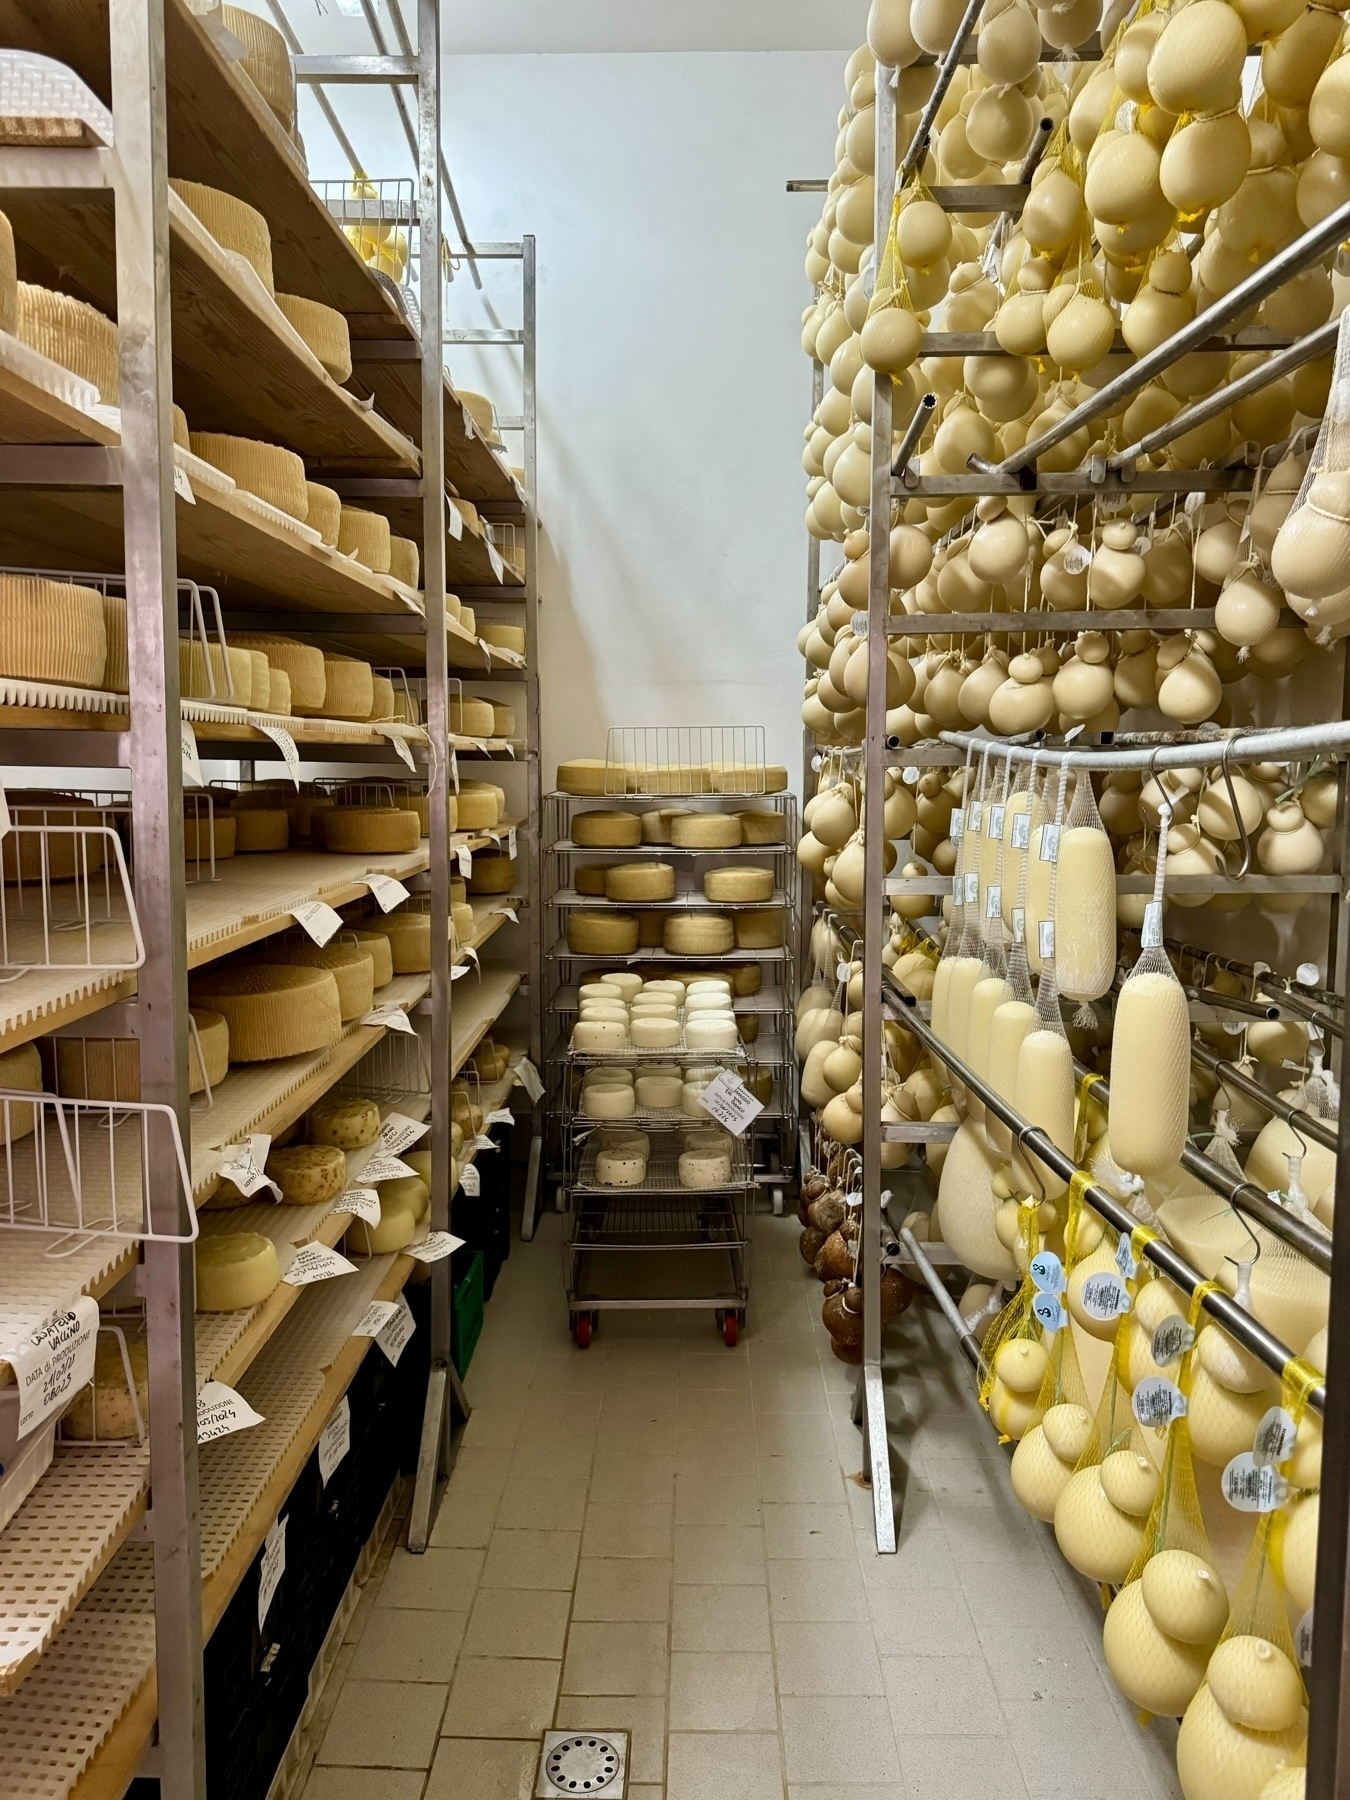 A storage room filled with shelves and racks holding various types and shapes of cheese. On the left, multiple rows of round, wheel-shaped cheeses are stacked on wooden shelves. On the right, round cheeses with a bulbous shape are hanging from metal racks. 